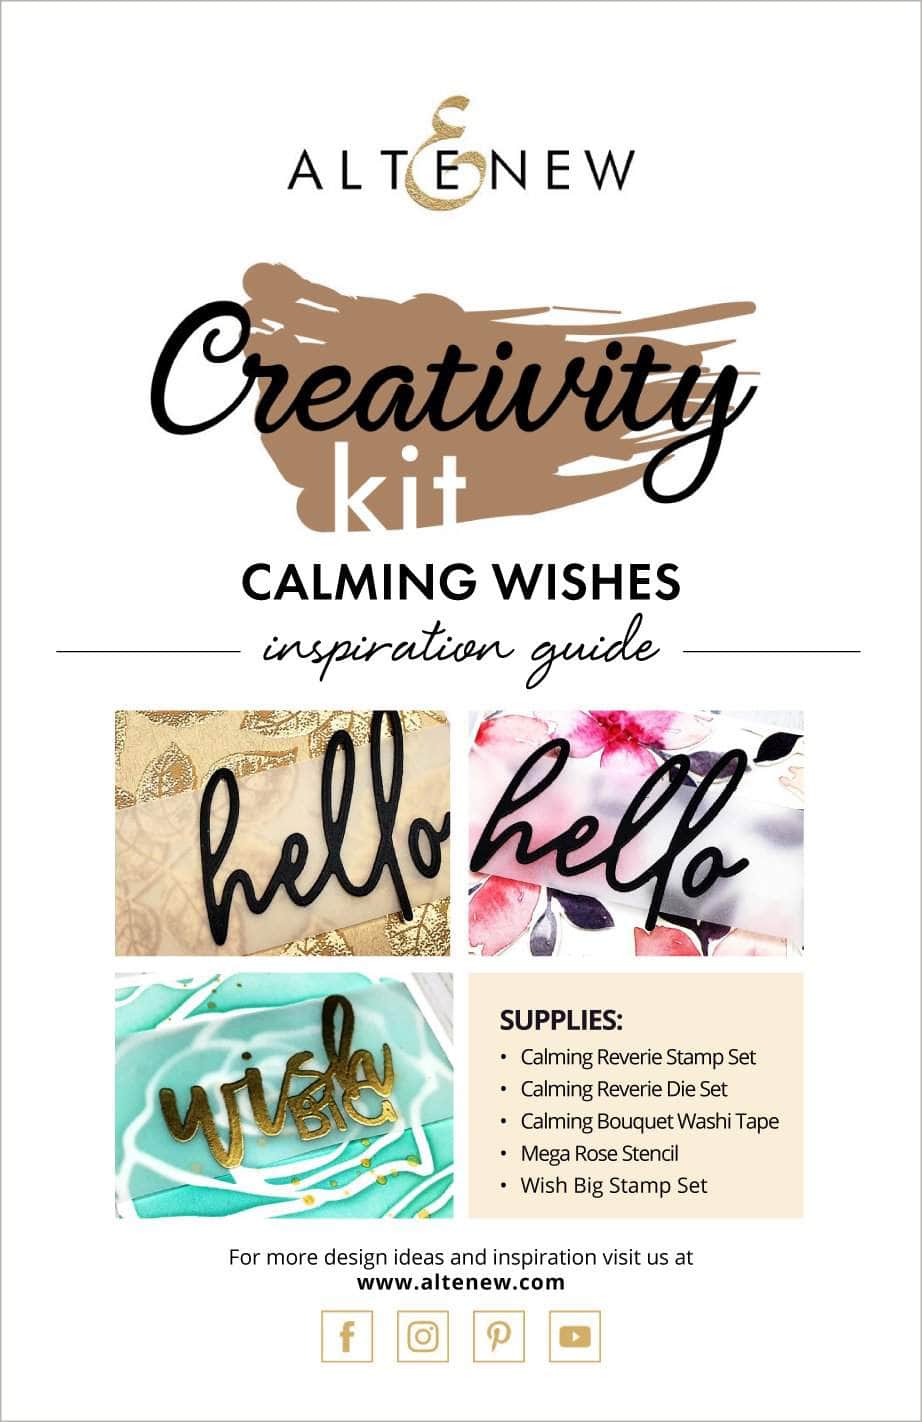 55Printing.com Printed Media Calming Wishes Creativity Kit Inspiration Guide